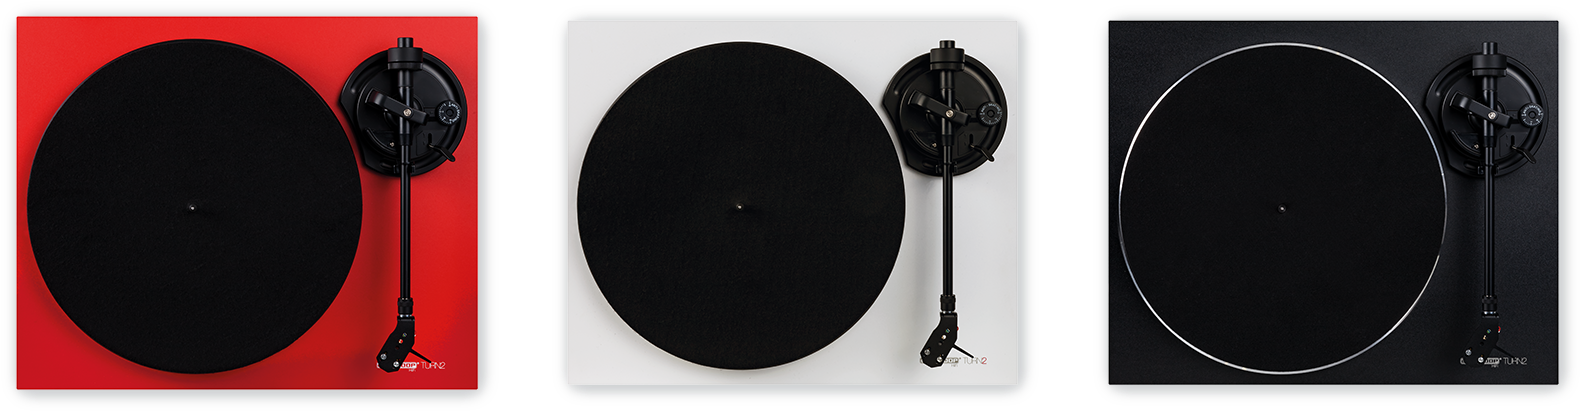 Analogue Hifi Turntable For Audio Purists - Circle (1596x424), Png Download